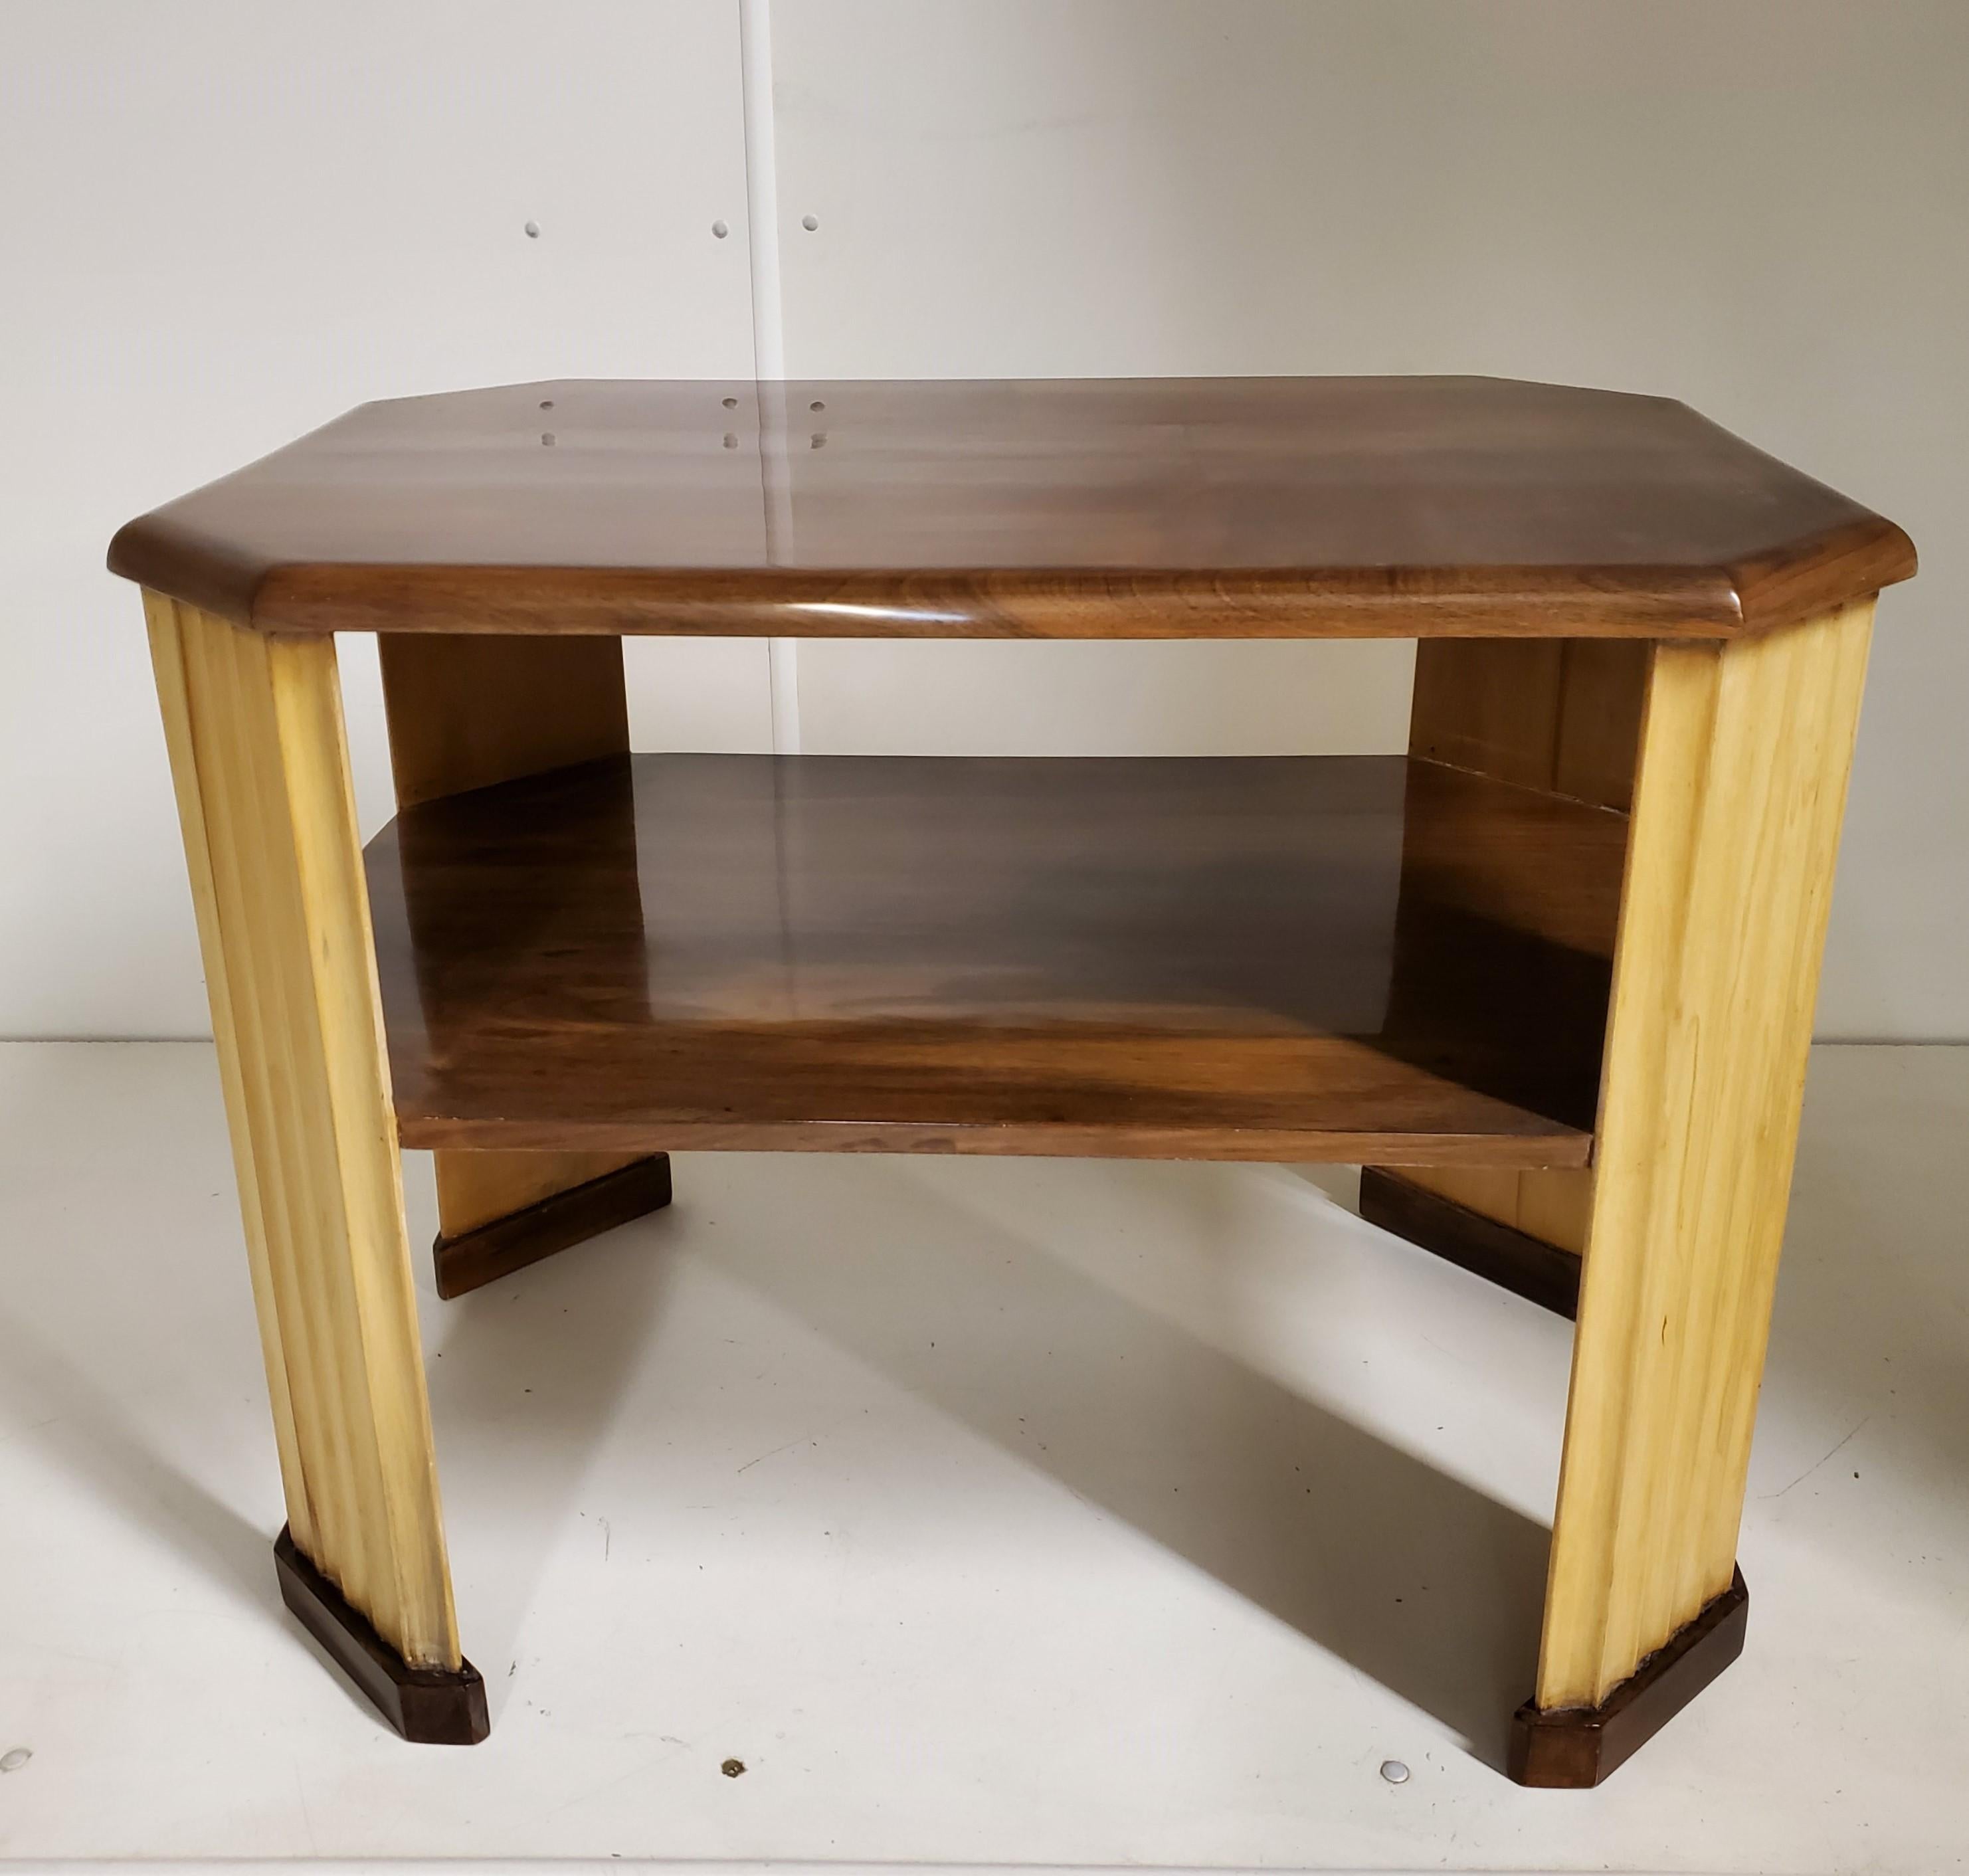 A French Art Deco end table in walnut and blond wood featuring four fluted legs supporting an inlaid parquetry top and co-joined by a stretcher shelf.
Functionality, practicality and beauty all in one!
This exquisite table can be used as a